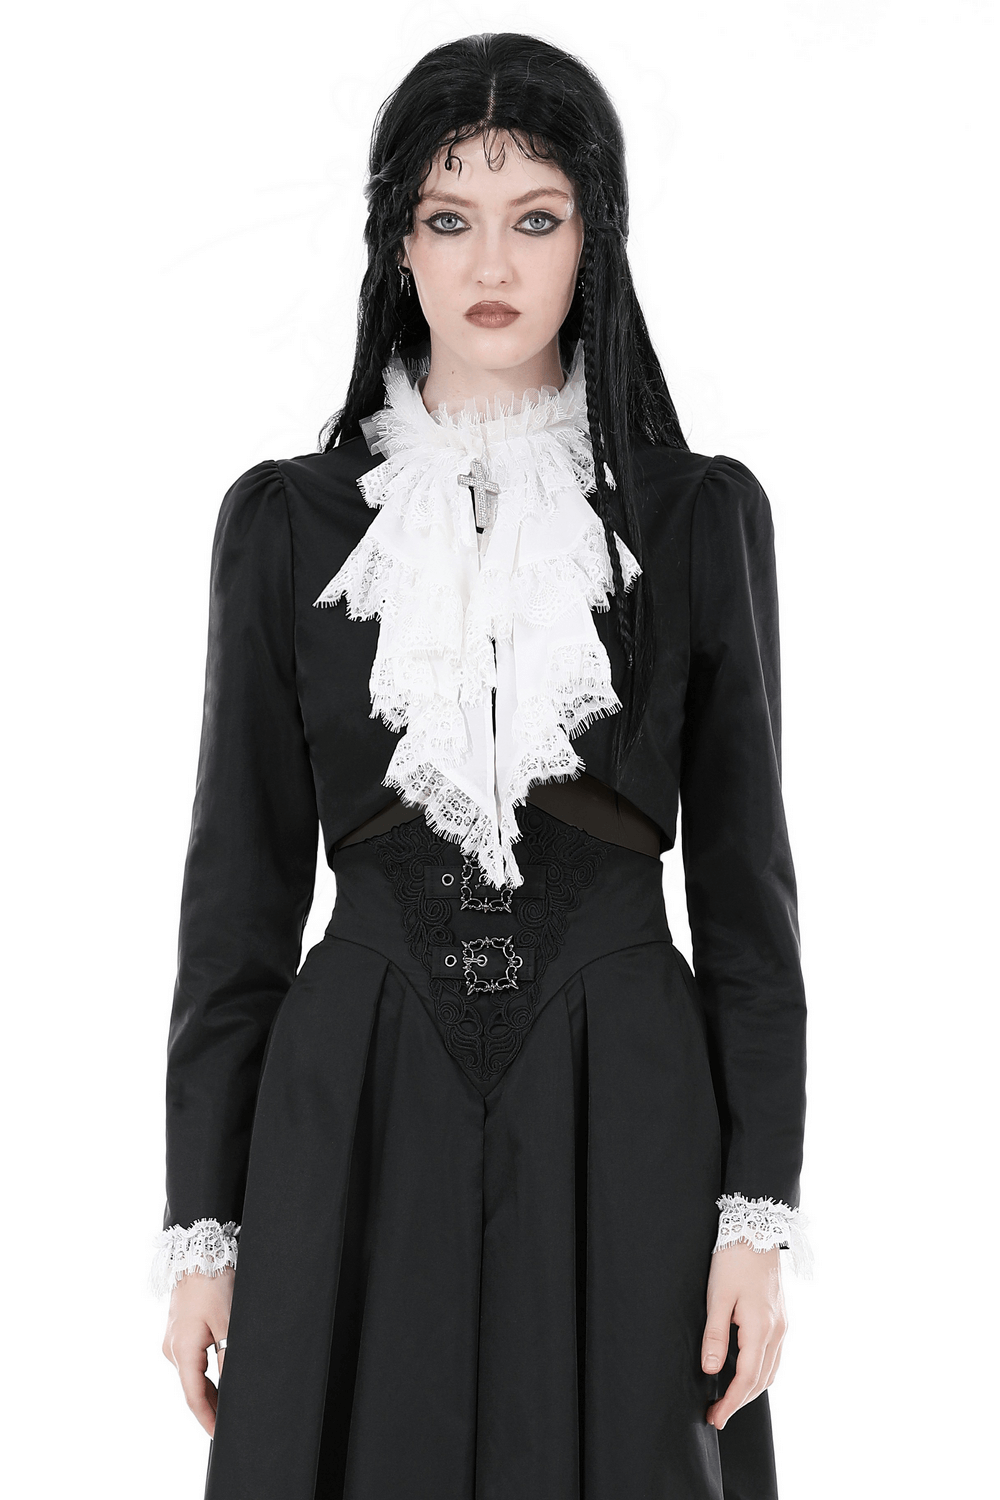 Gothic Cropped Lace Short Jacket with White Ruffle Collar